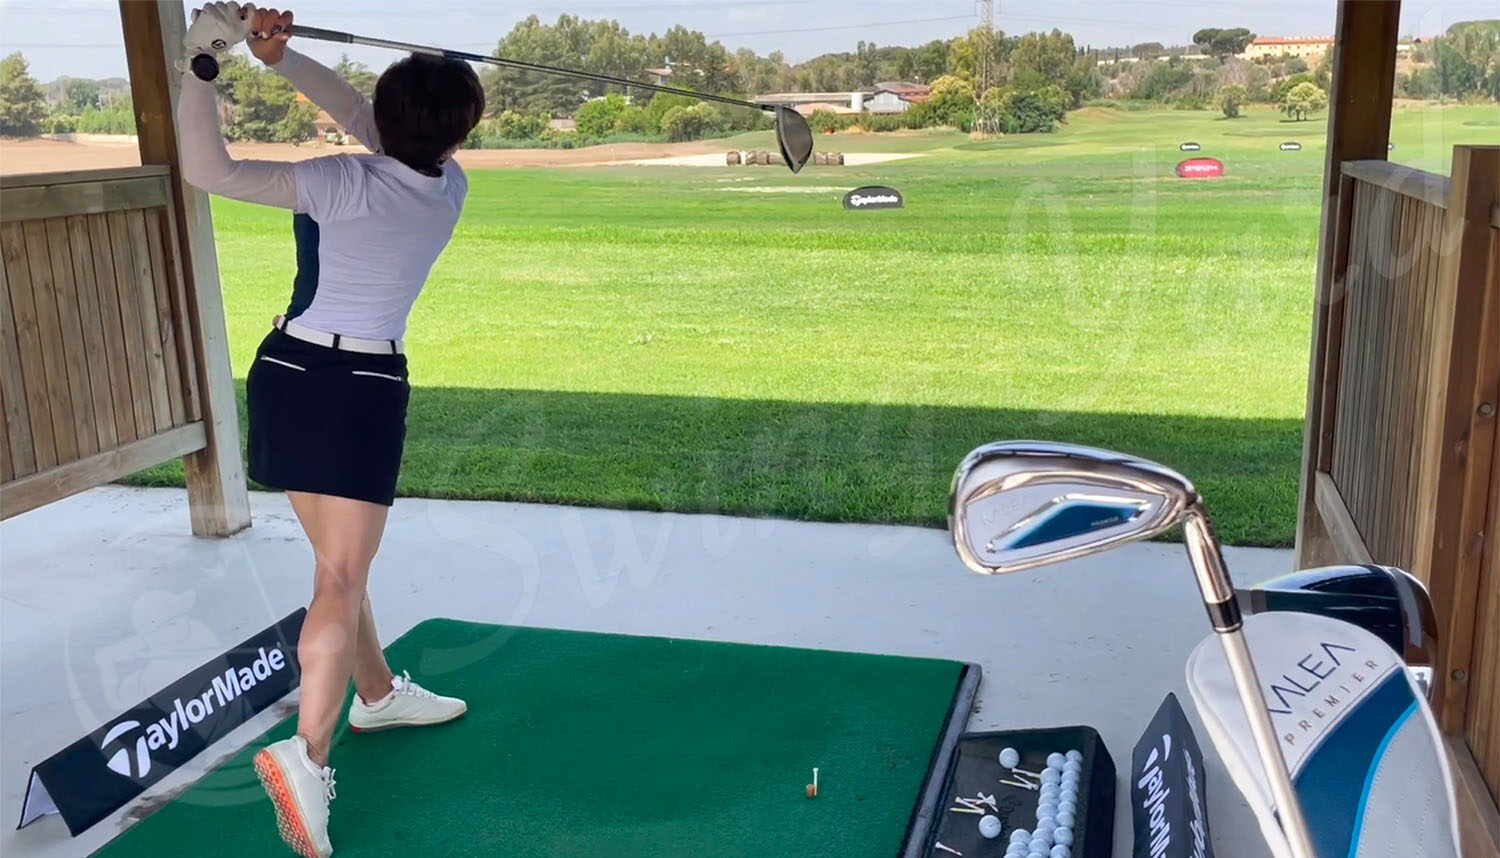 Me swinging the TaylorMade Kalea Premier at the golf course